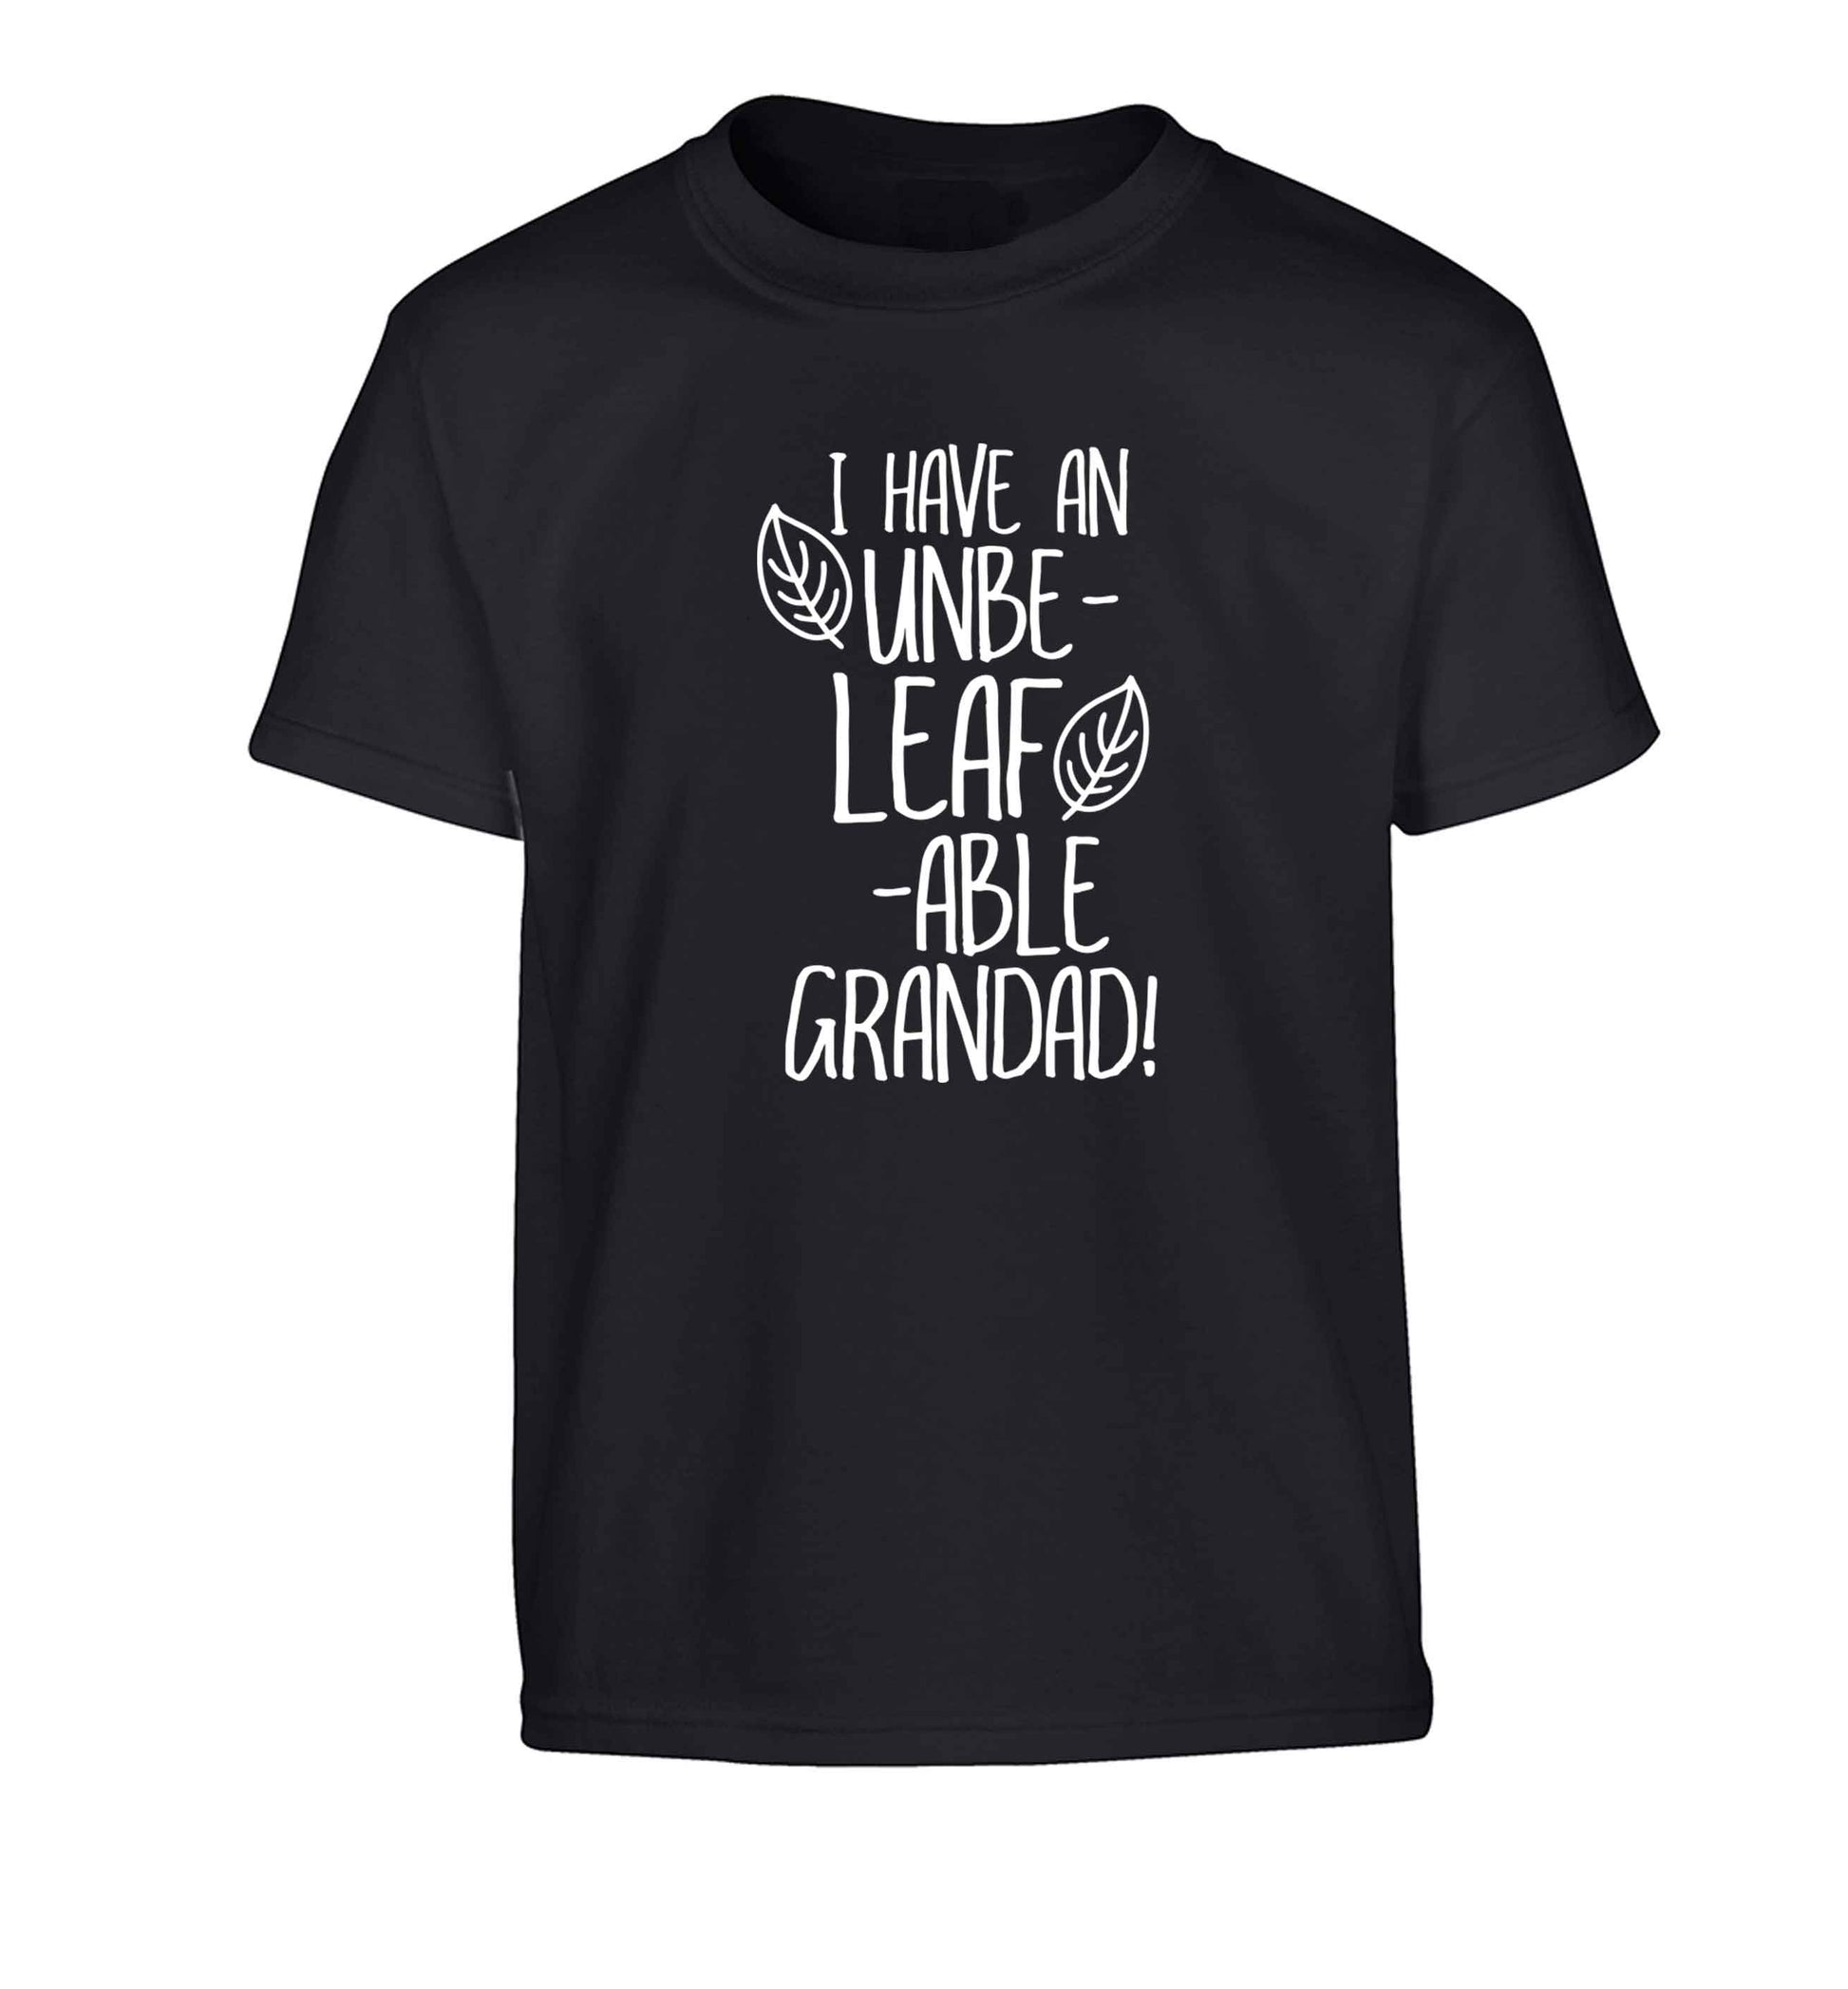 I have an unbe-leaf-able grandad Children's black Tshirt 12-13 Years